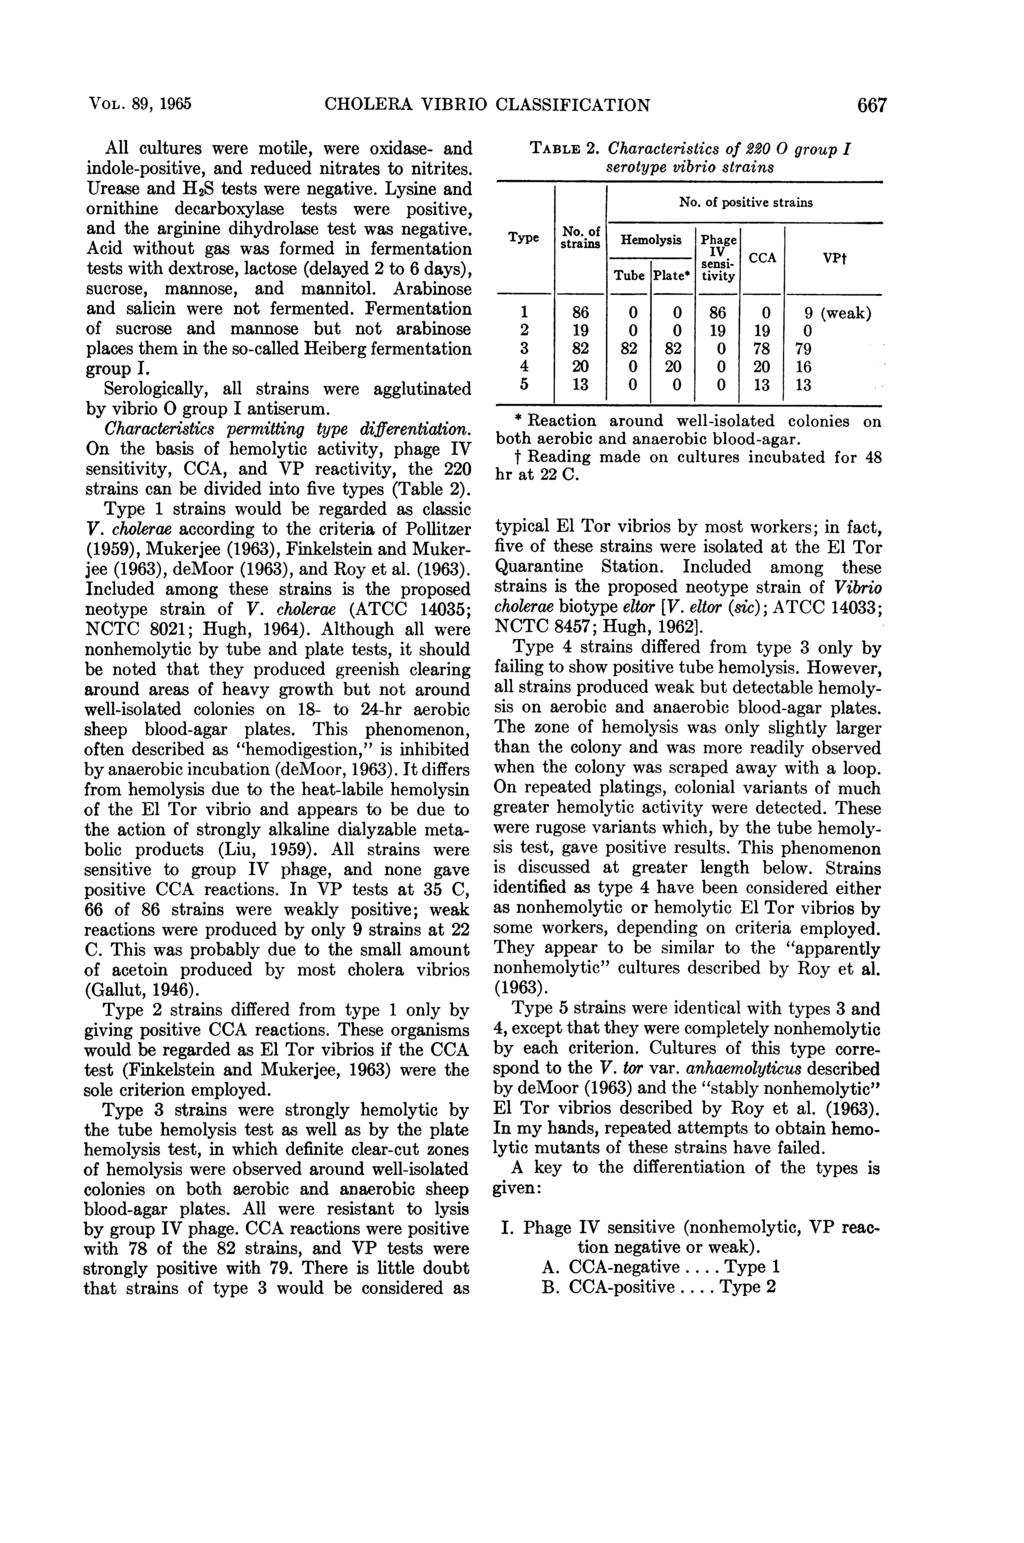 VOL. 89, 1965 CHOLERA VIBRIO CLASSIFICATION 667 All cultures were motile, were oxidase- and indole-positive, and reduced nitrates to nitrites. Urease and H2S tests were negative.